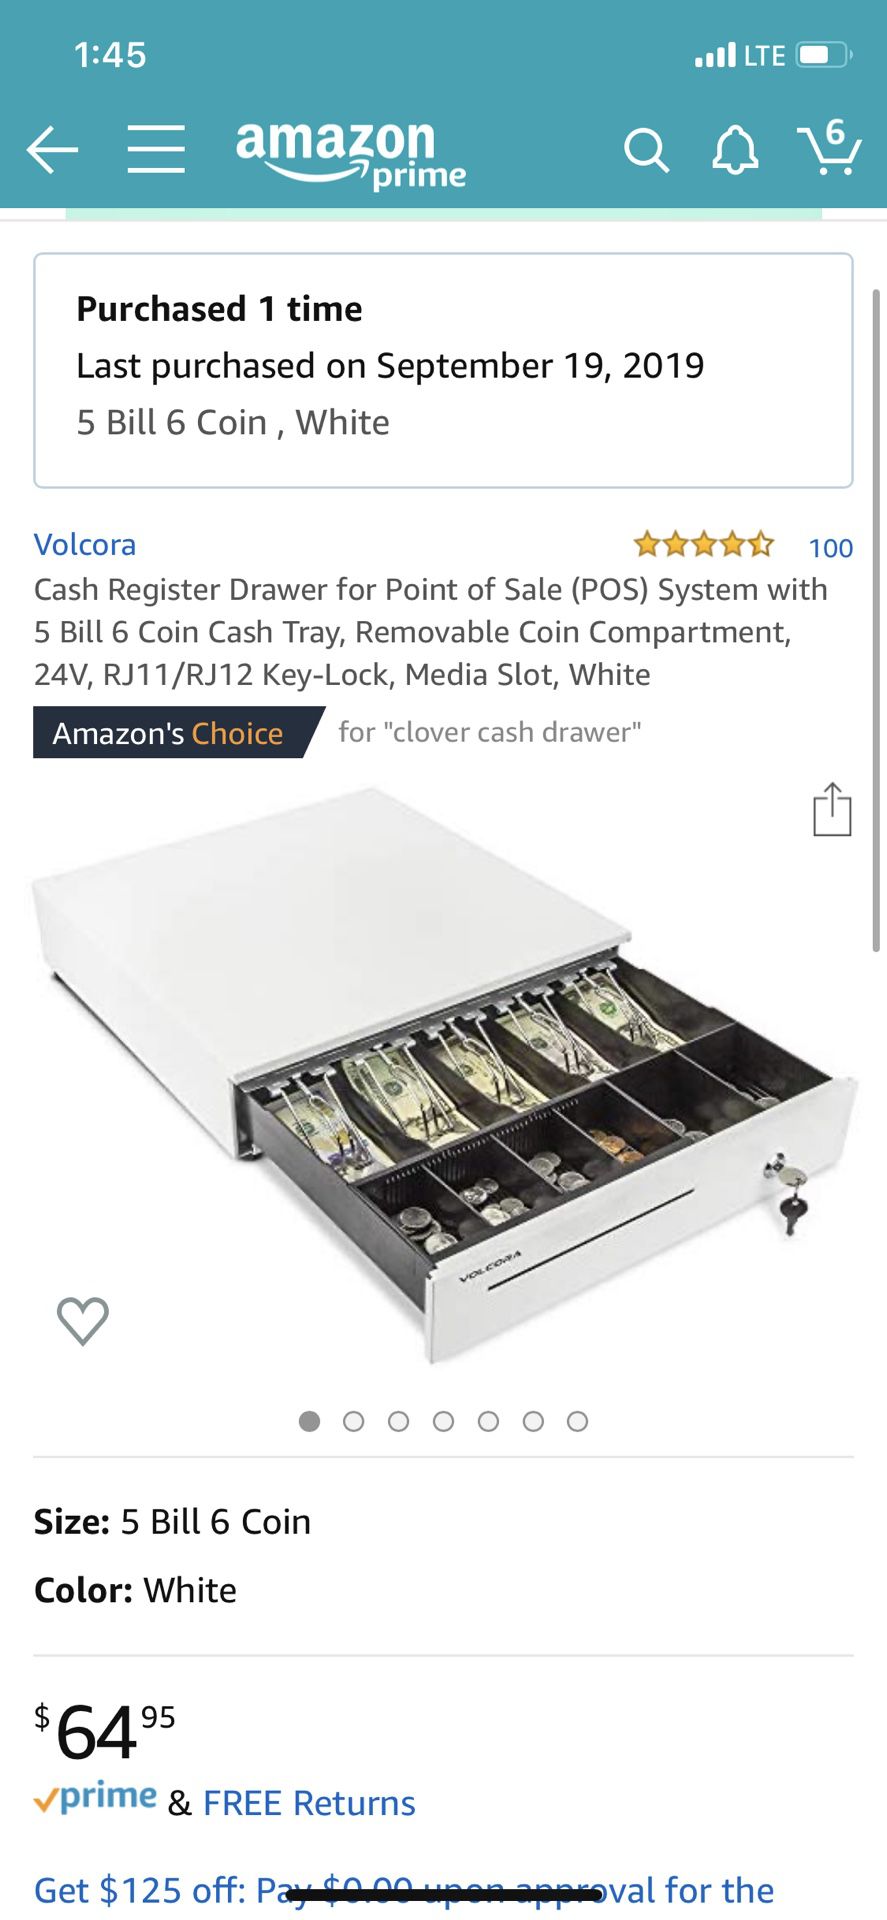 Volcora Cash Register Drawer for Point of Sale (POS) System with 5 Bill 6 Coin Cash Tray, Removable Coin Compartment,